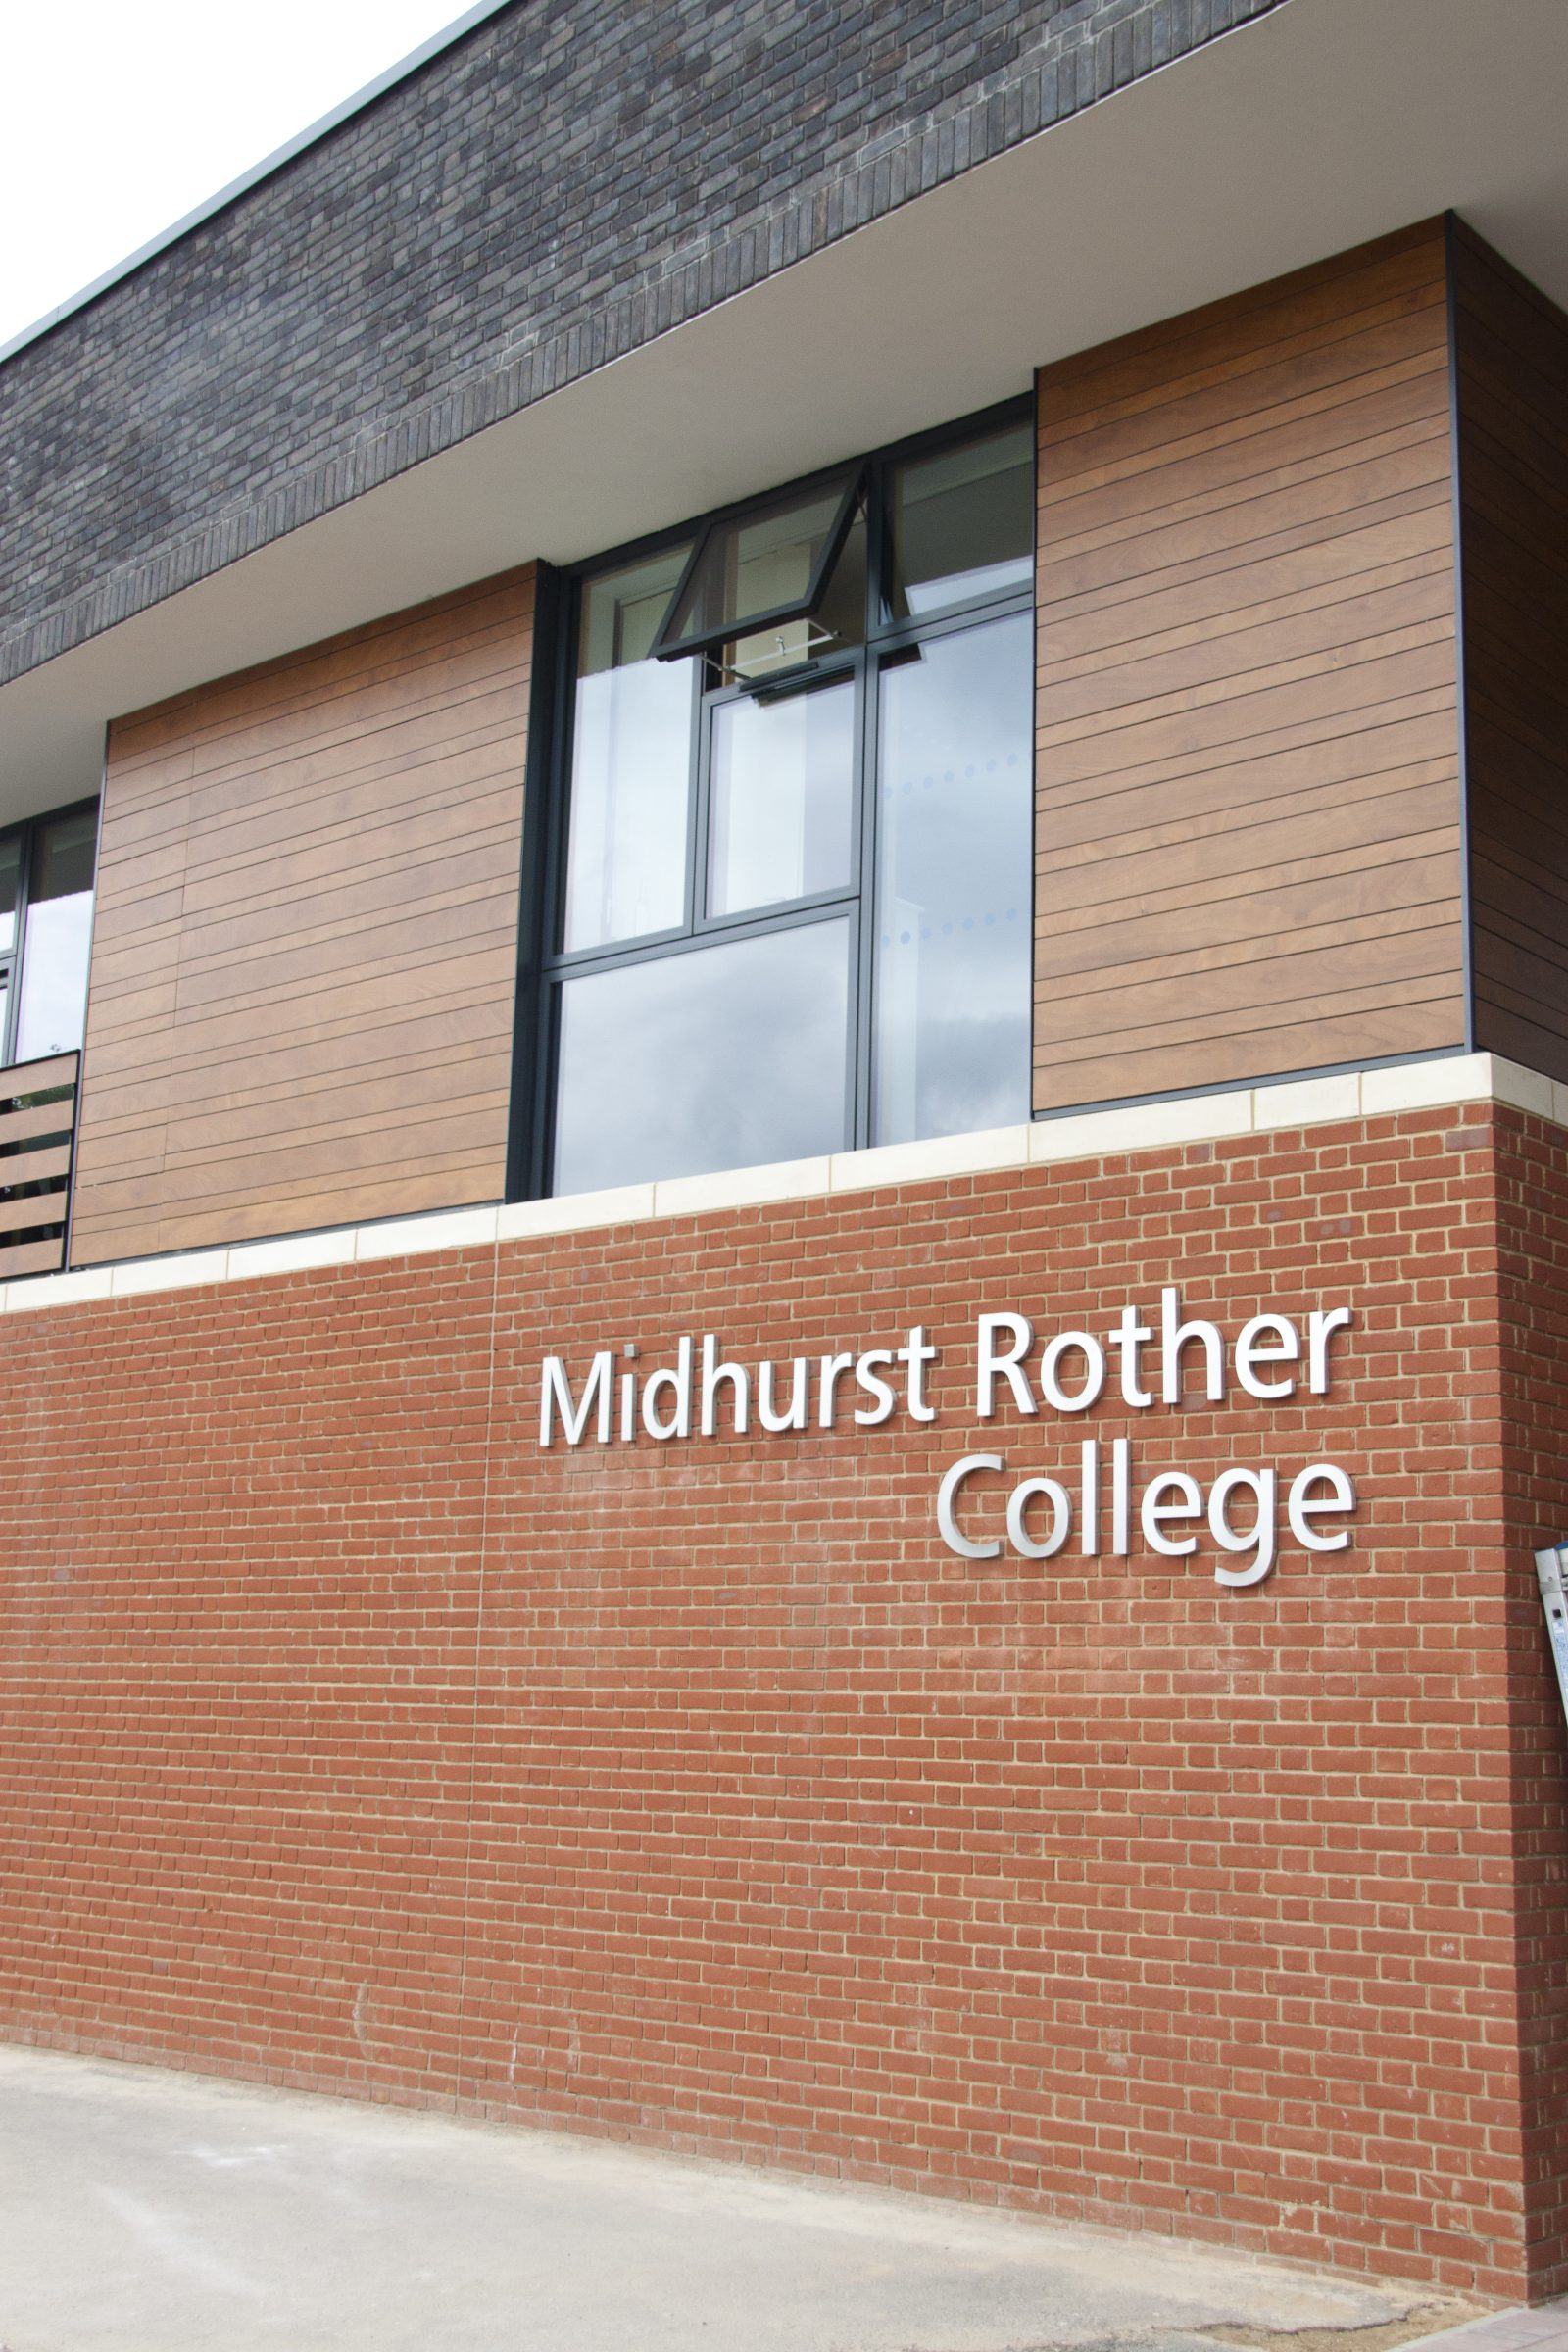 Midhurst Rother College and Shoreham Academy